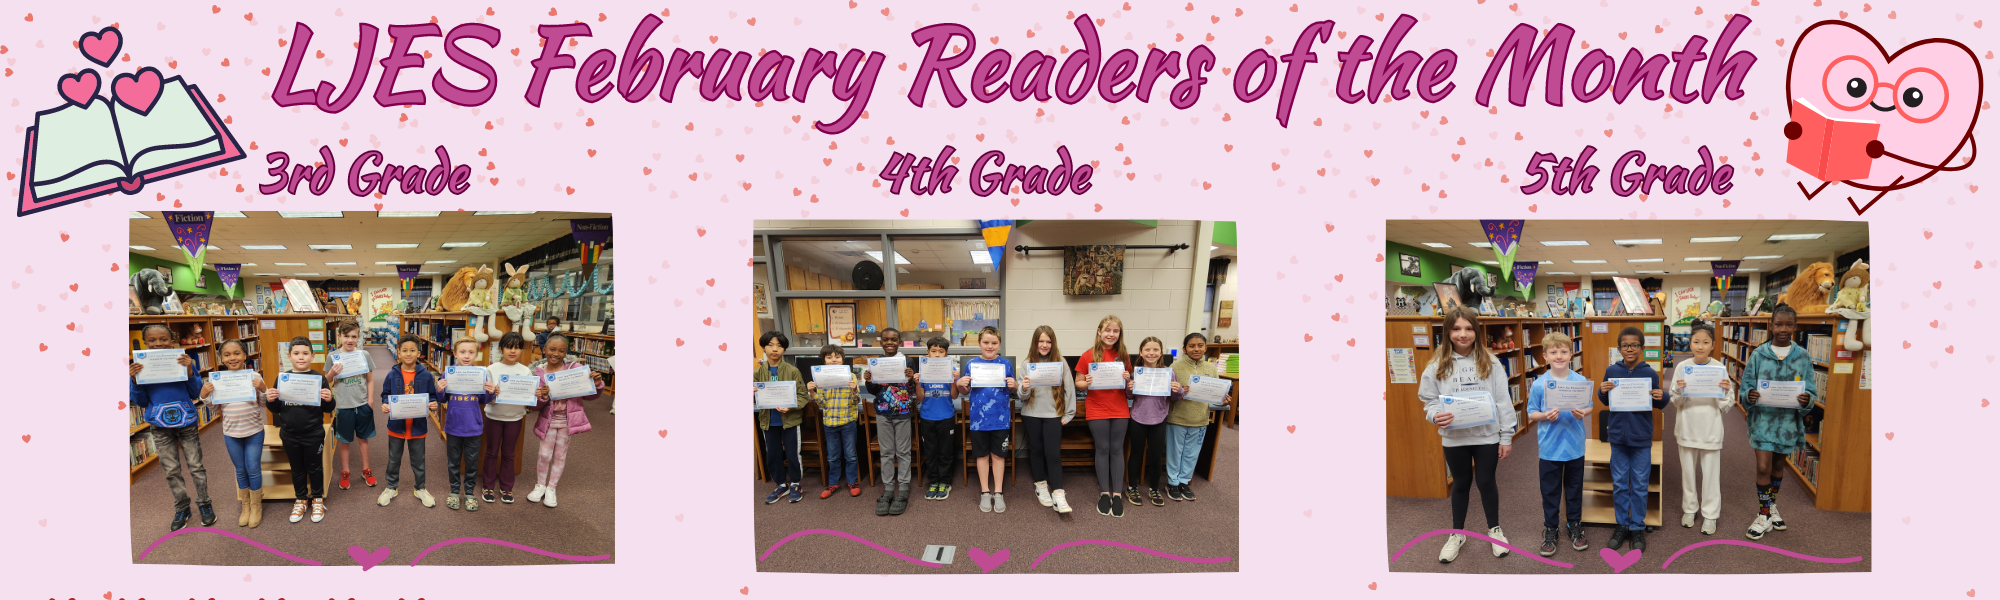 February Readers of the Month